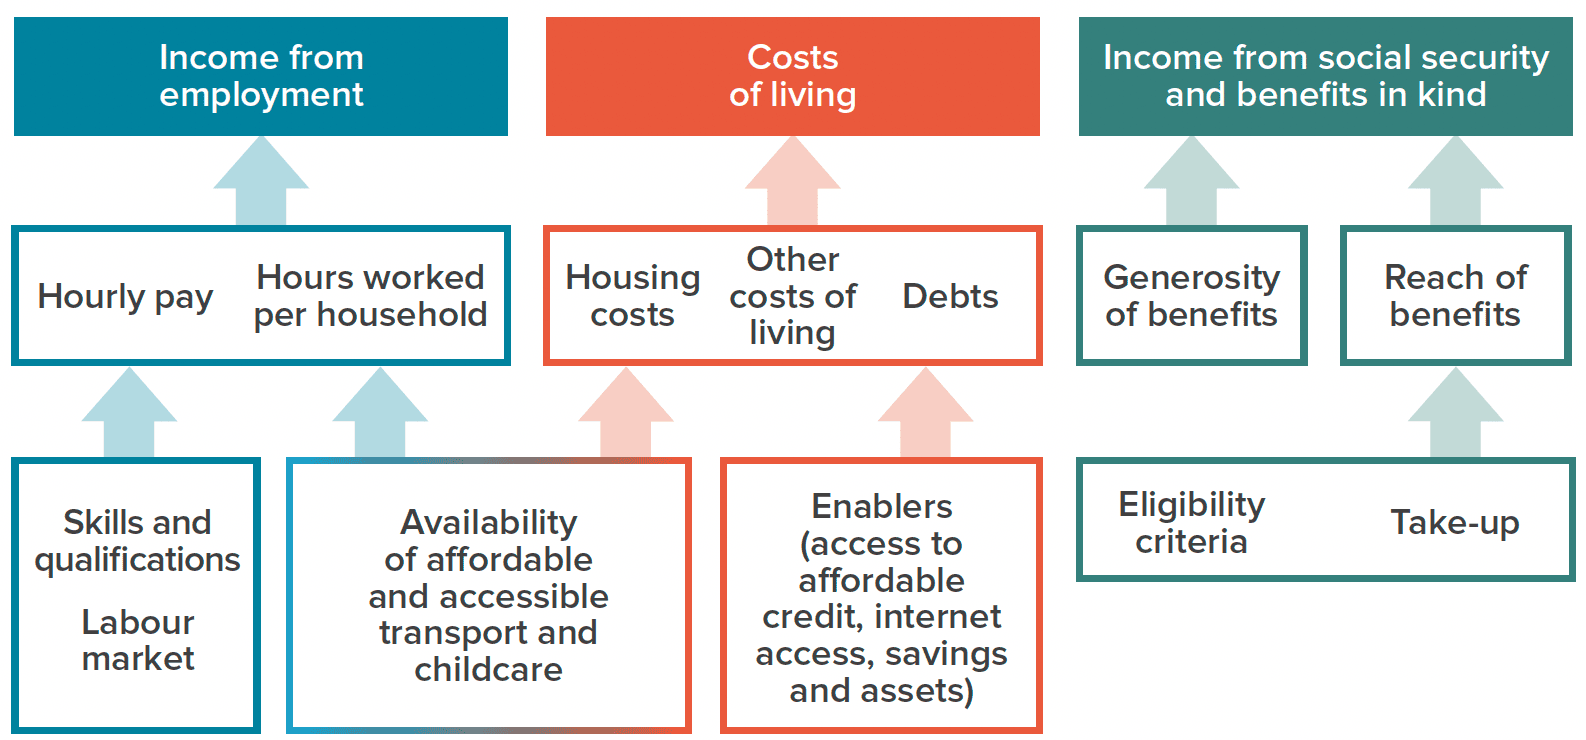 Figure 2 shows that there are three direct drivers of child poverty reduction – income from employment, cost of living and income from social security and benefits in kind. 

The factors impacting income from employment, are hourly pay and hours worked per household. These are impacted by skills and qualifications, the Labour Market and availability of affordable and accessible transport and childcare. 

The factors impacting Cost of Living are housing costs; other cost of living; and debts. These are impacted by availability of affordable and accessible transport and child care; and other enablers such as access to affordable credit, internet access, savings and assets.

The factors impacting Income from social security and benefits in kind are generosity and reach of benefits. These are impacted by eligibility criteria and take up.
